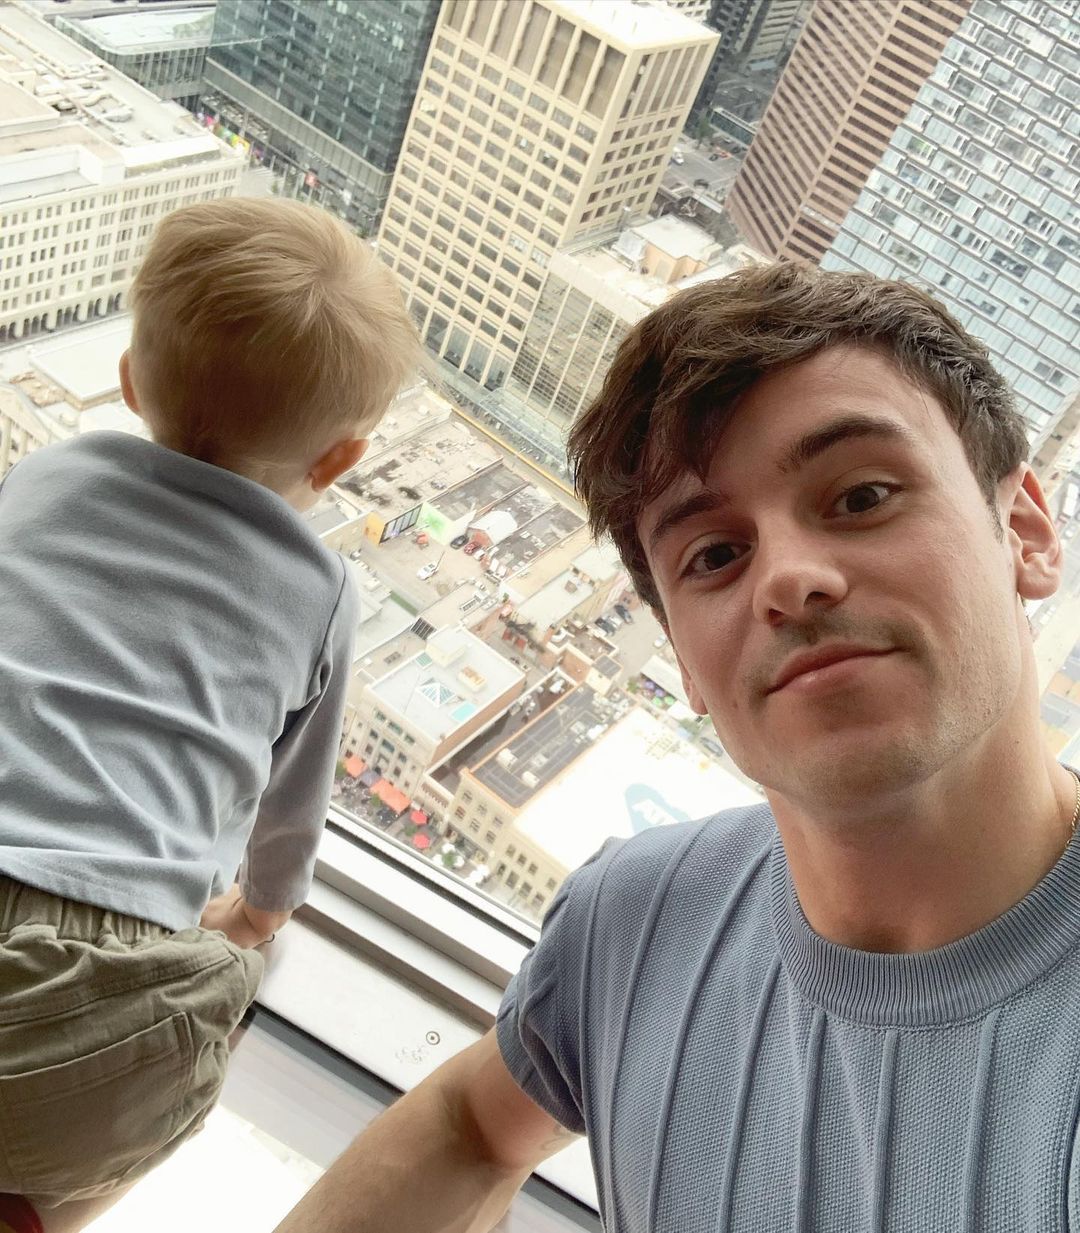 Tom Dalby with son at the top of a building